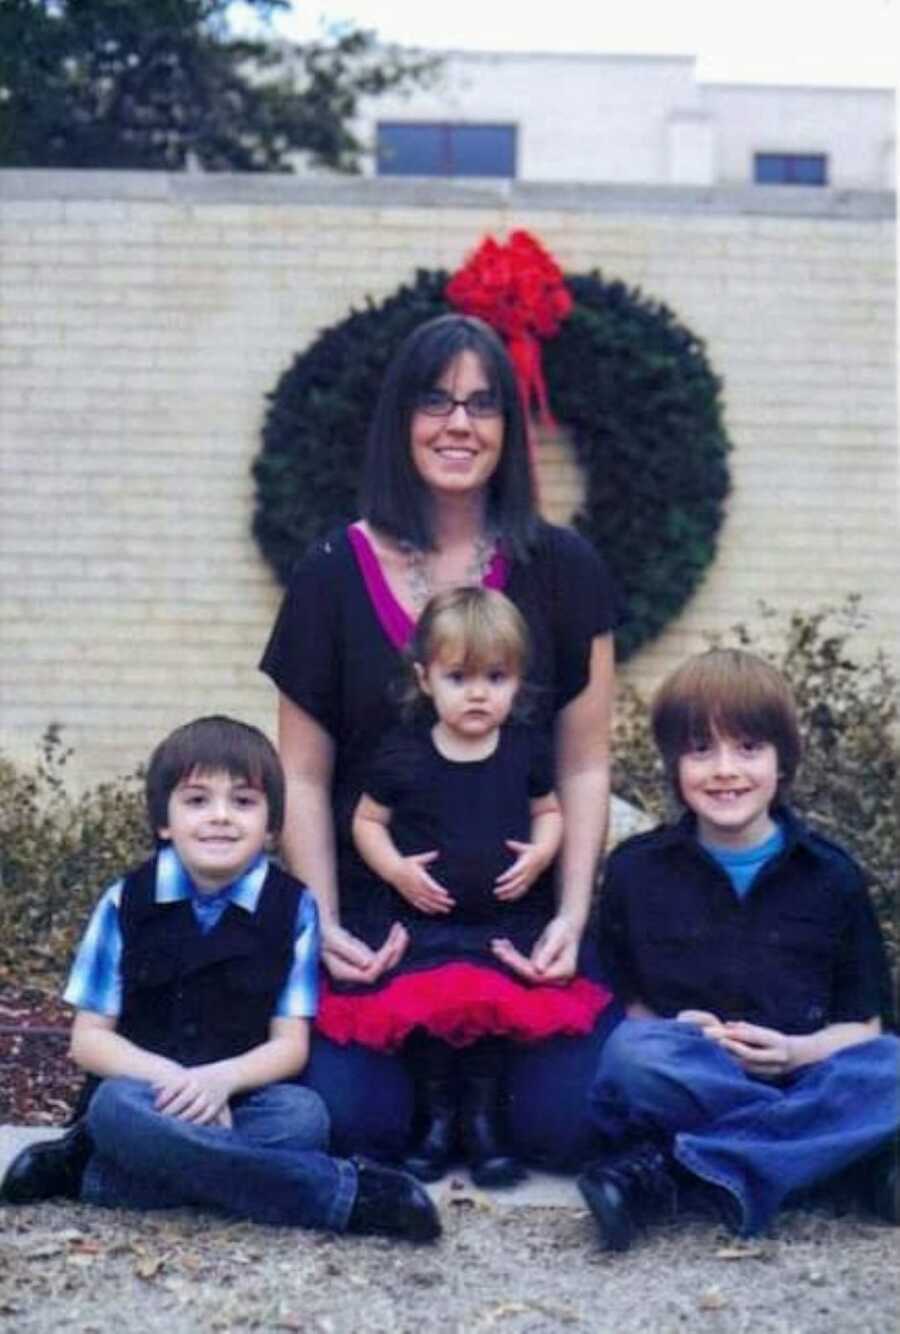 Mom of three takes Christmas photos with her children while her husband is in jail